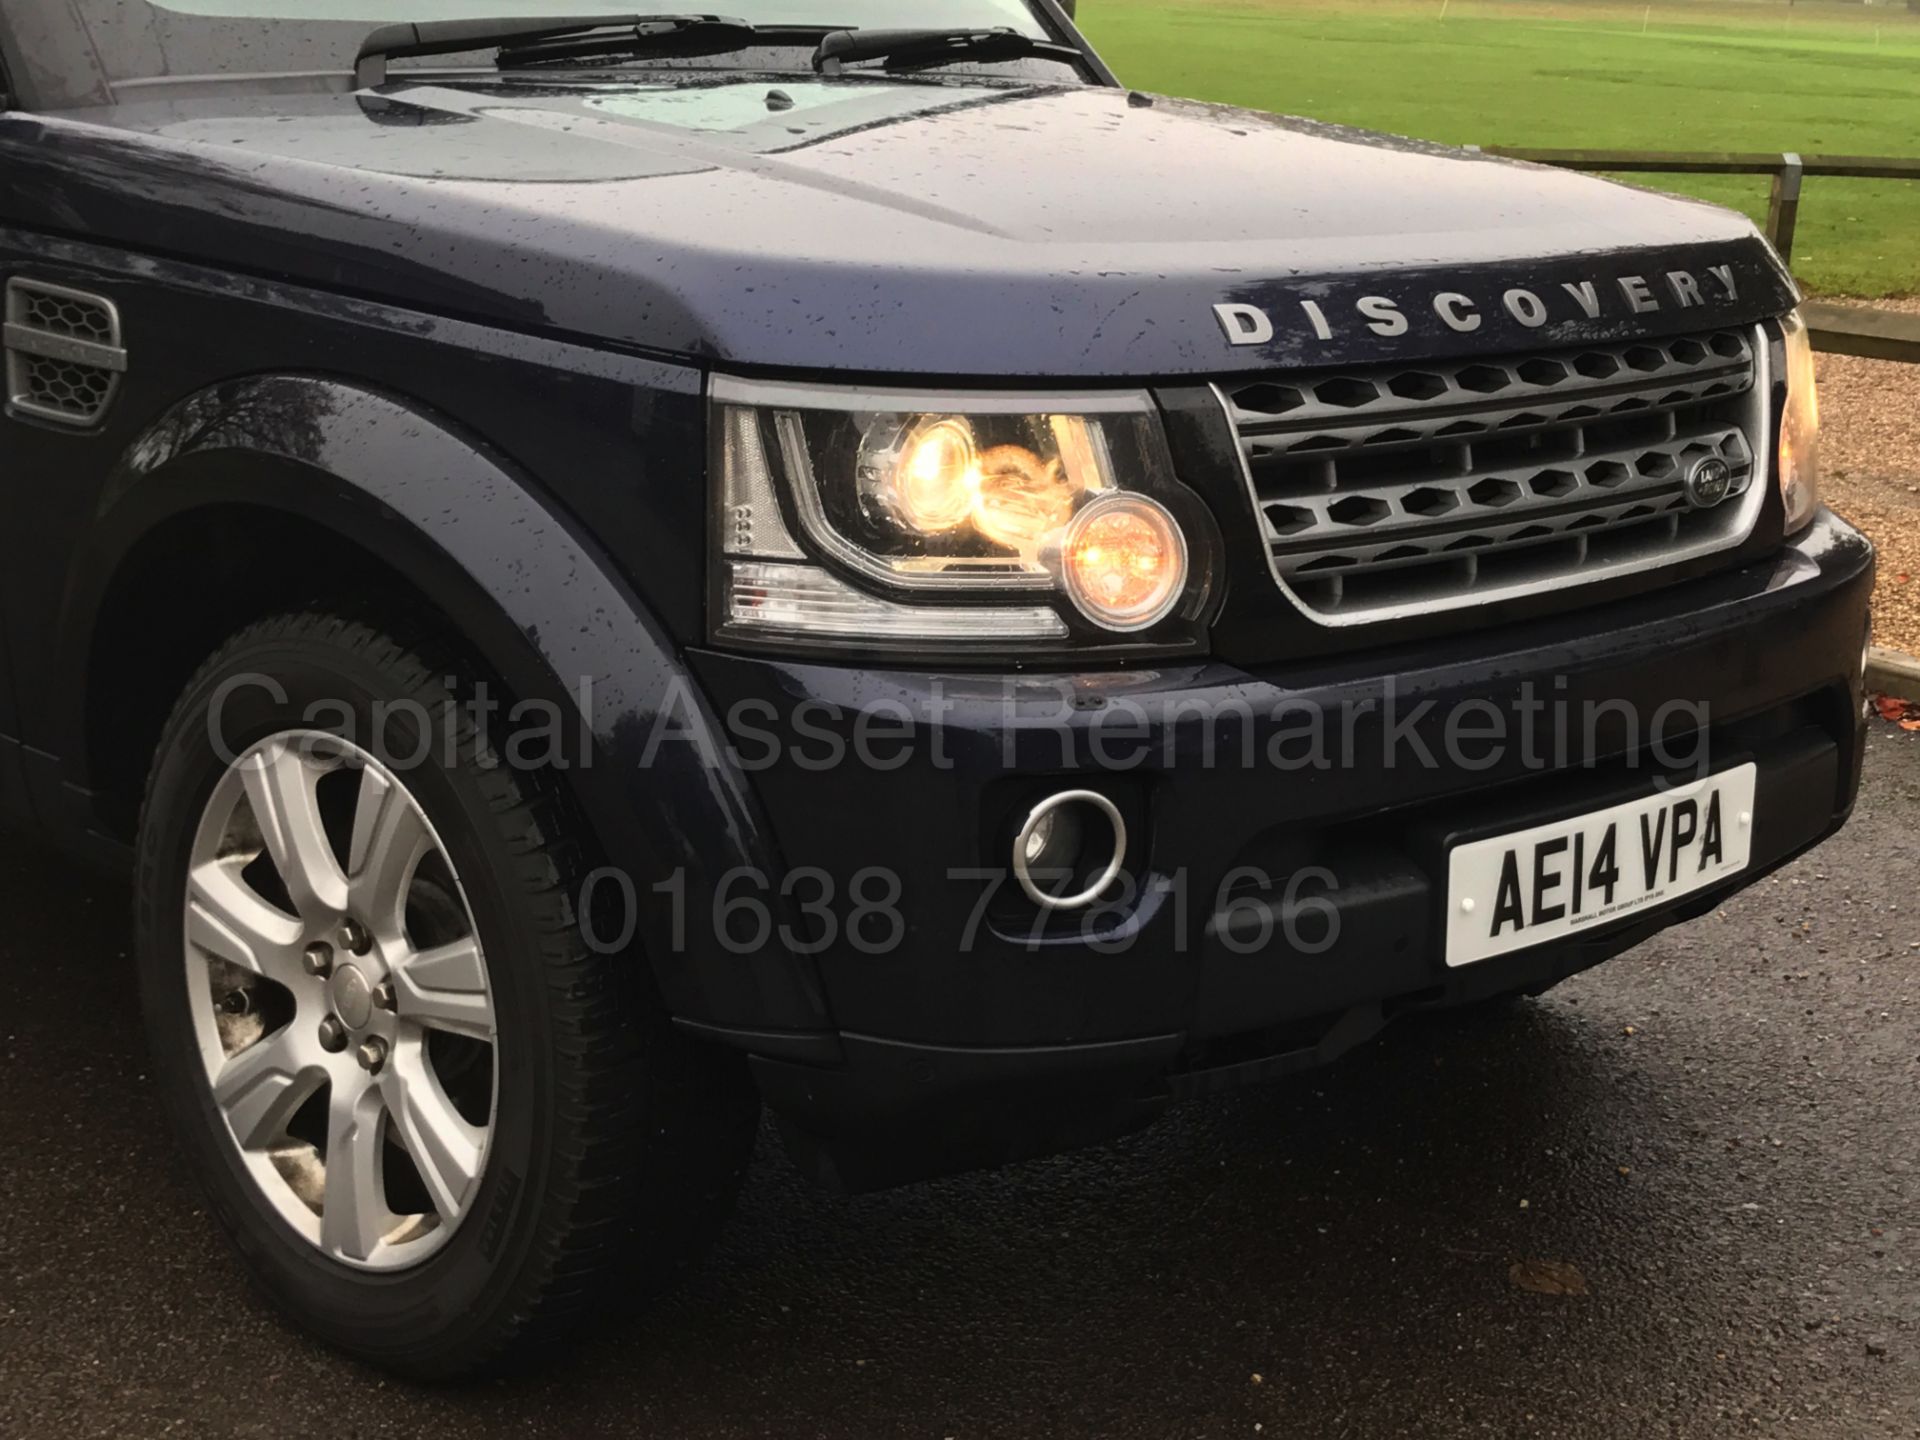 ON SALE LAND ROVER DISCOVERY 4 (2014) '3.0 SDV6 - 8 SPEED AUTO - LEATHER - SAT NAV -7 SEATER'1 OWNER - Image 11 of 41